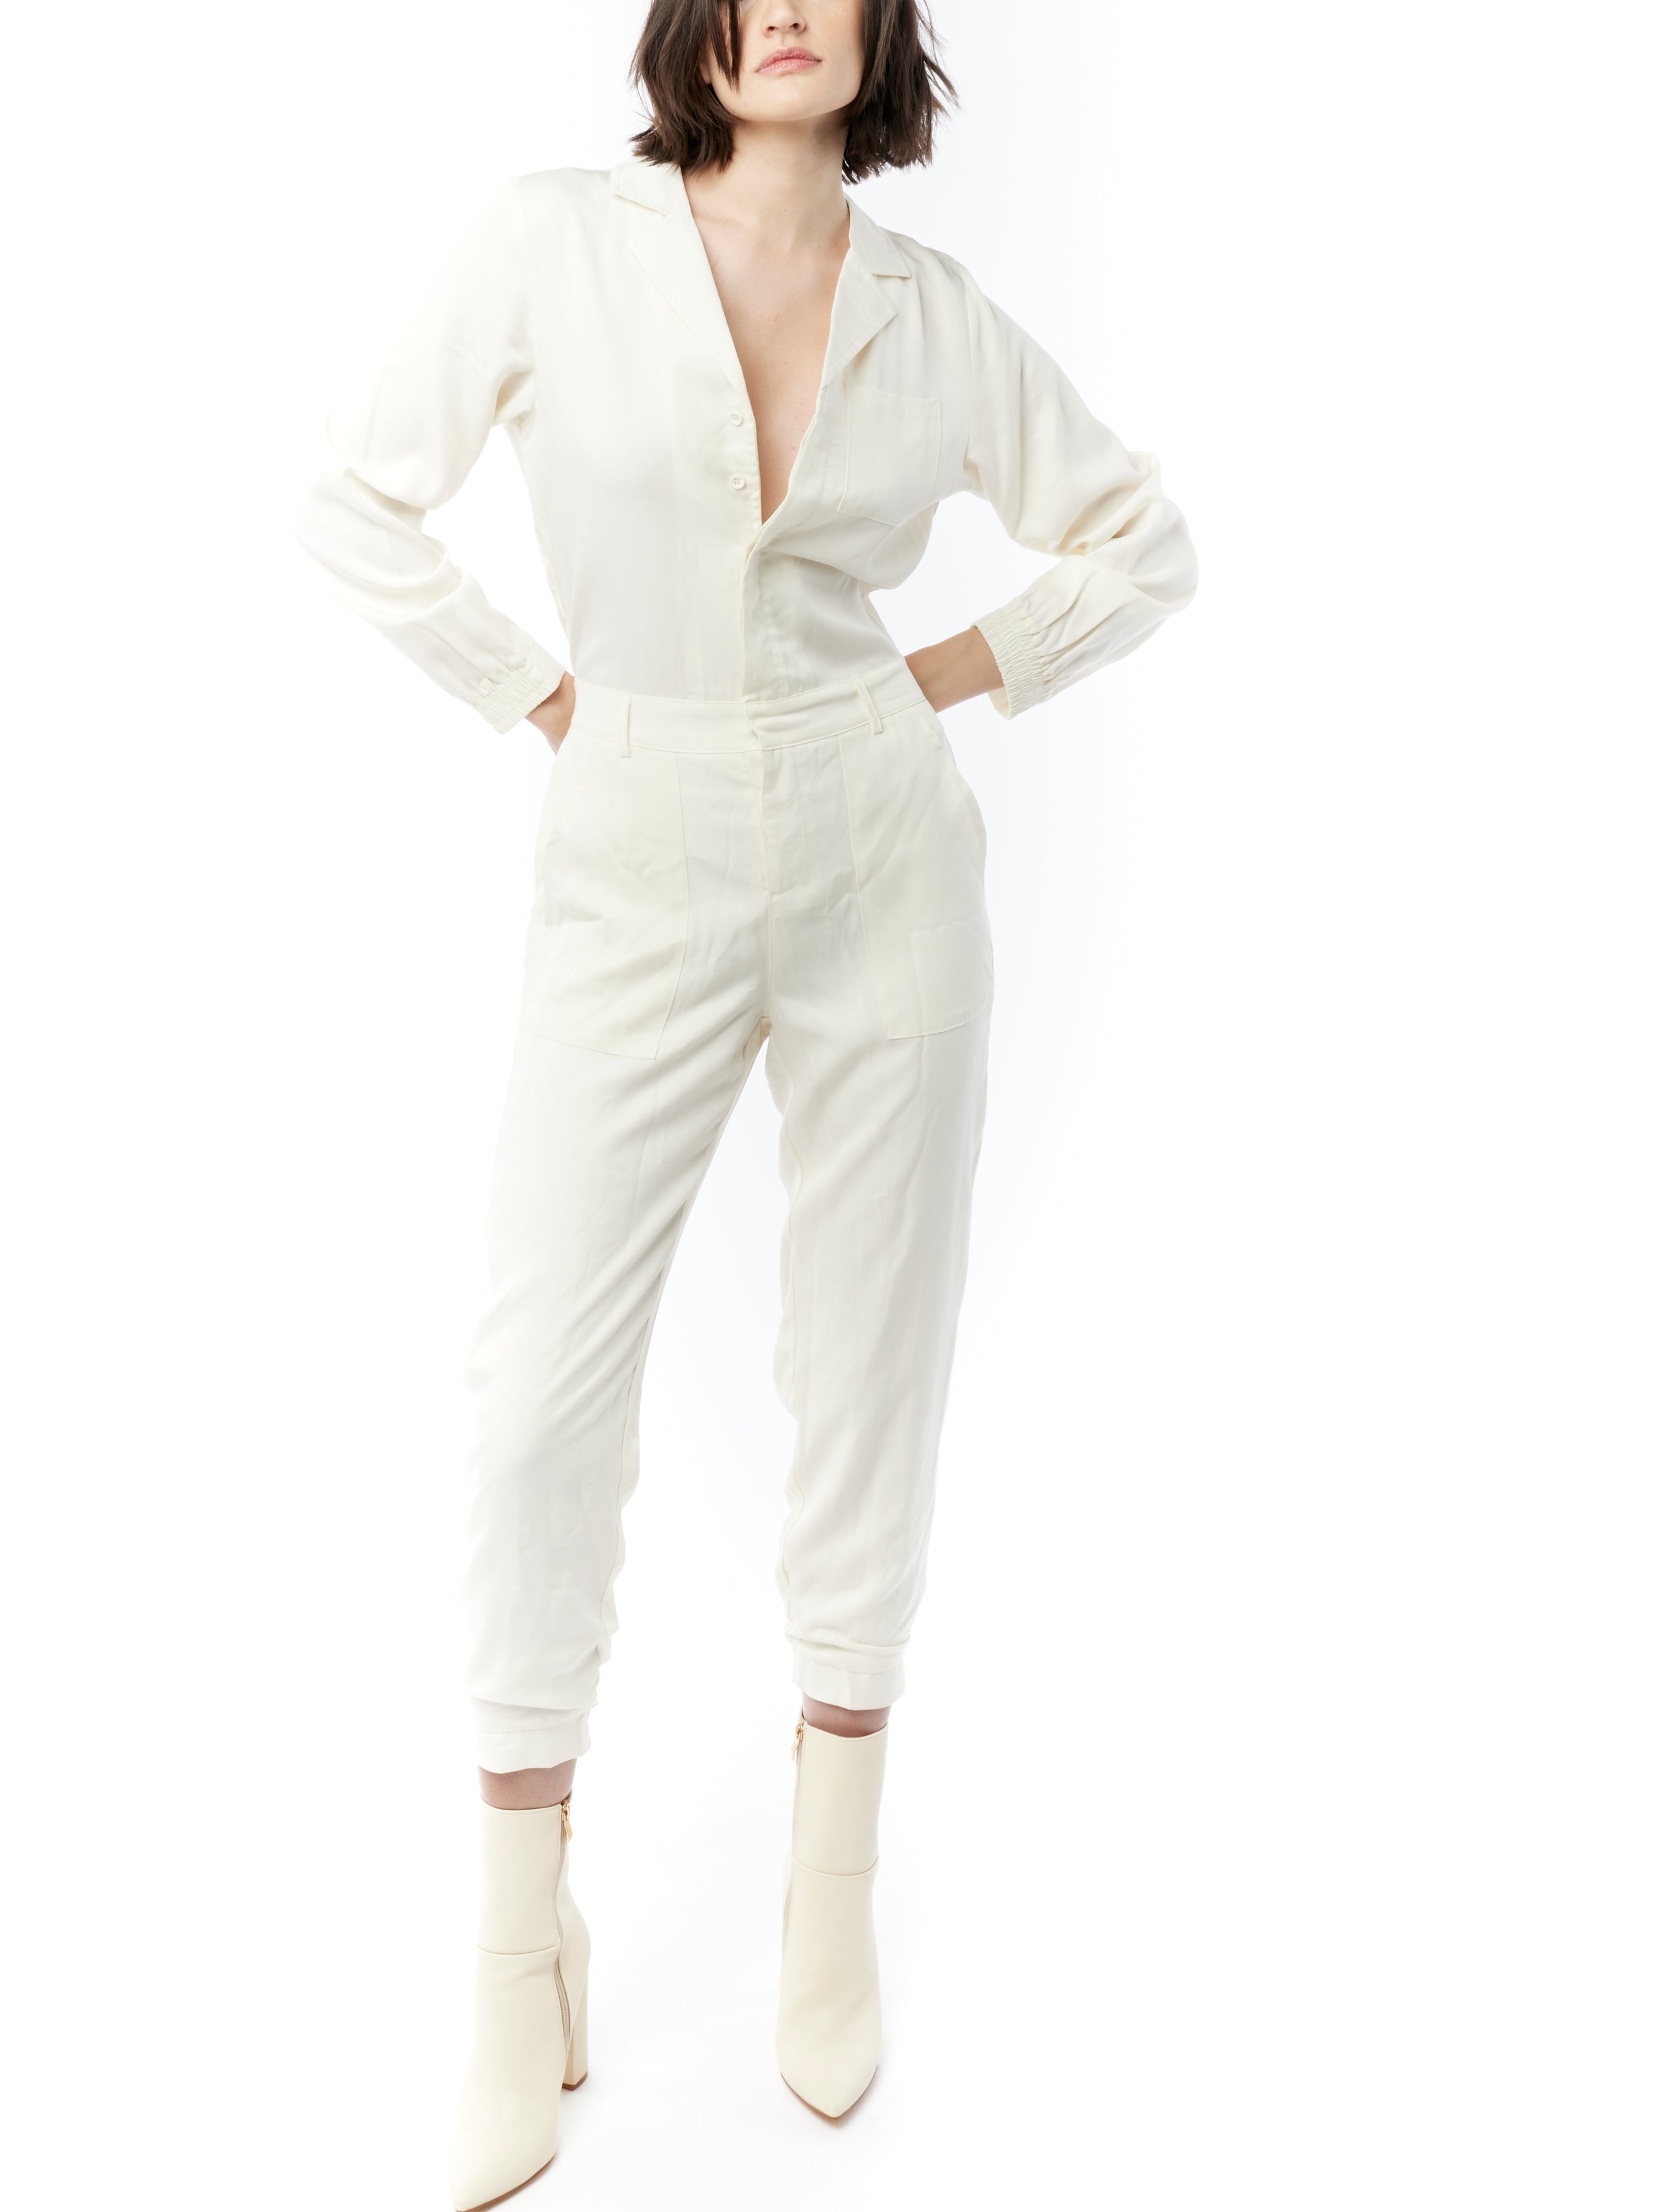 jumpsuit featuring a collared, button-front, long, cuffed sleeves, elasticized waist and bottom cuffs in ivory